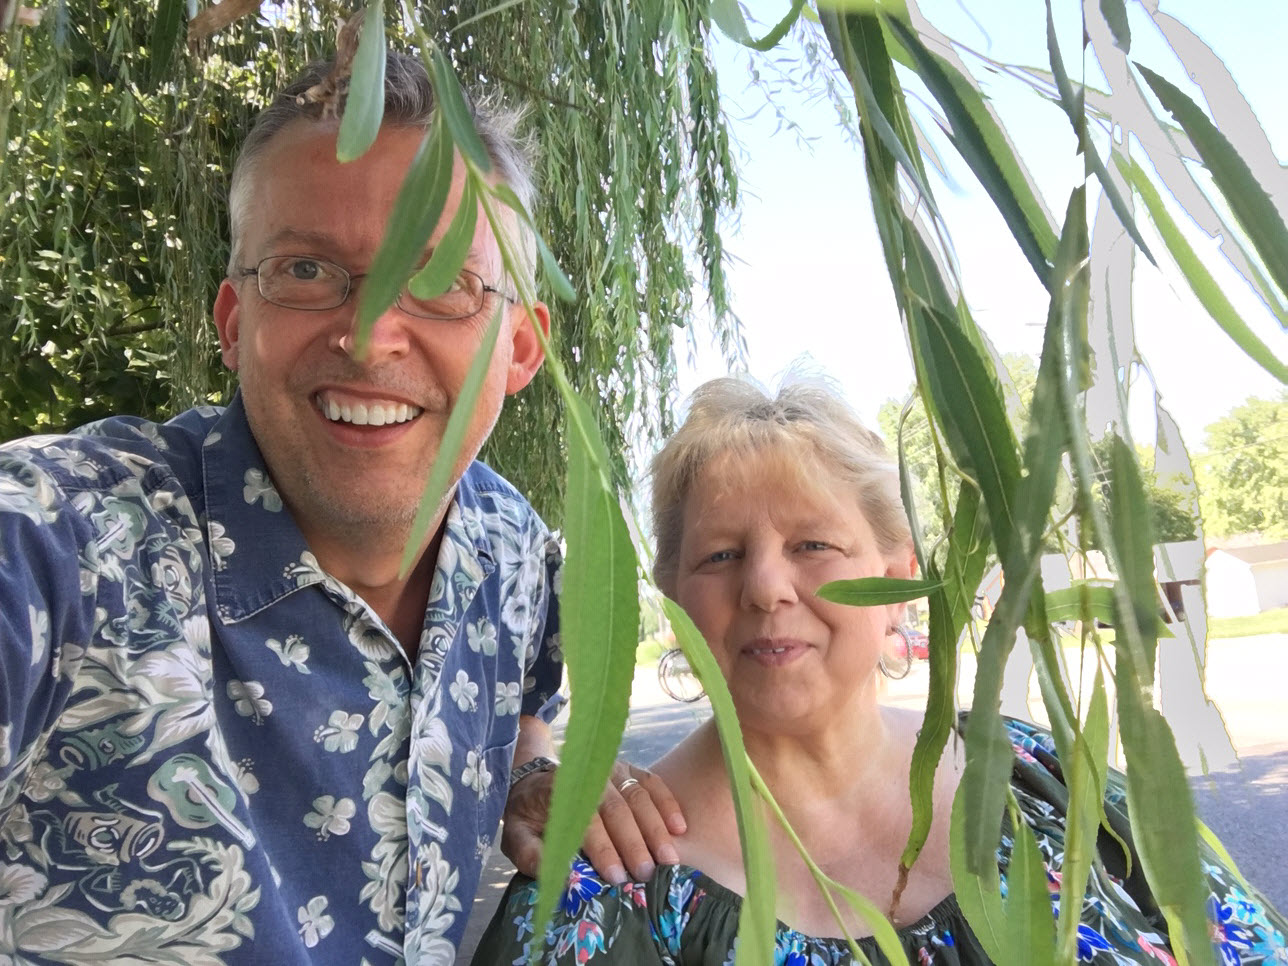 Christian and Helen Bohlen peeking through the Weeping Willow jungle on their walk to the grocery store